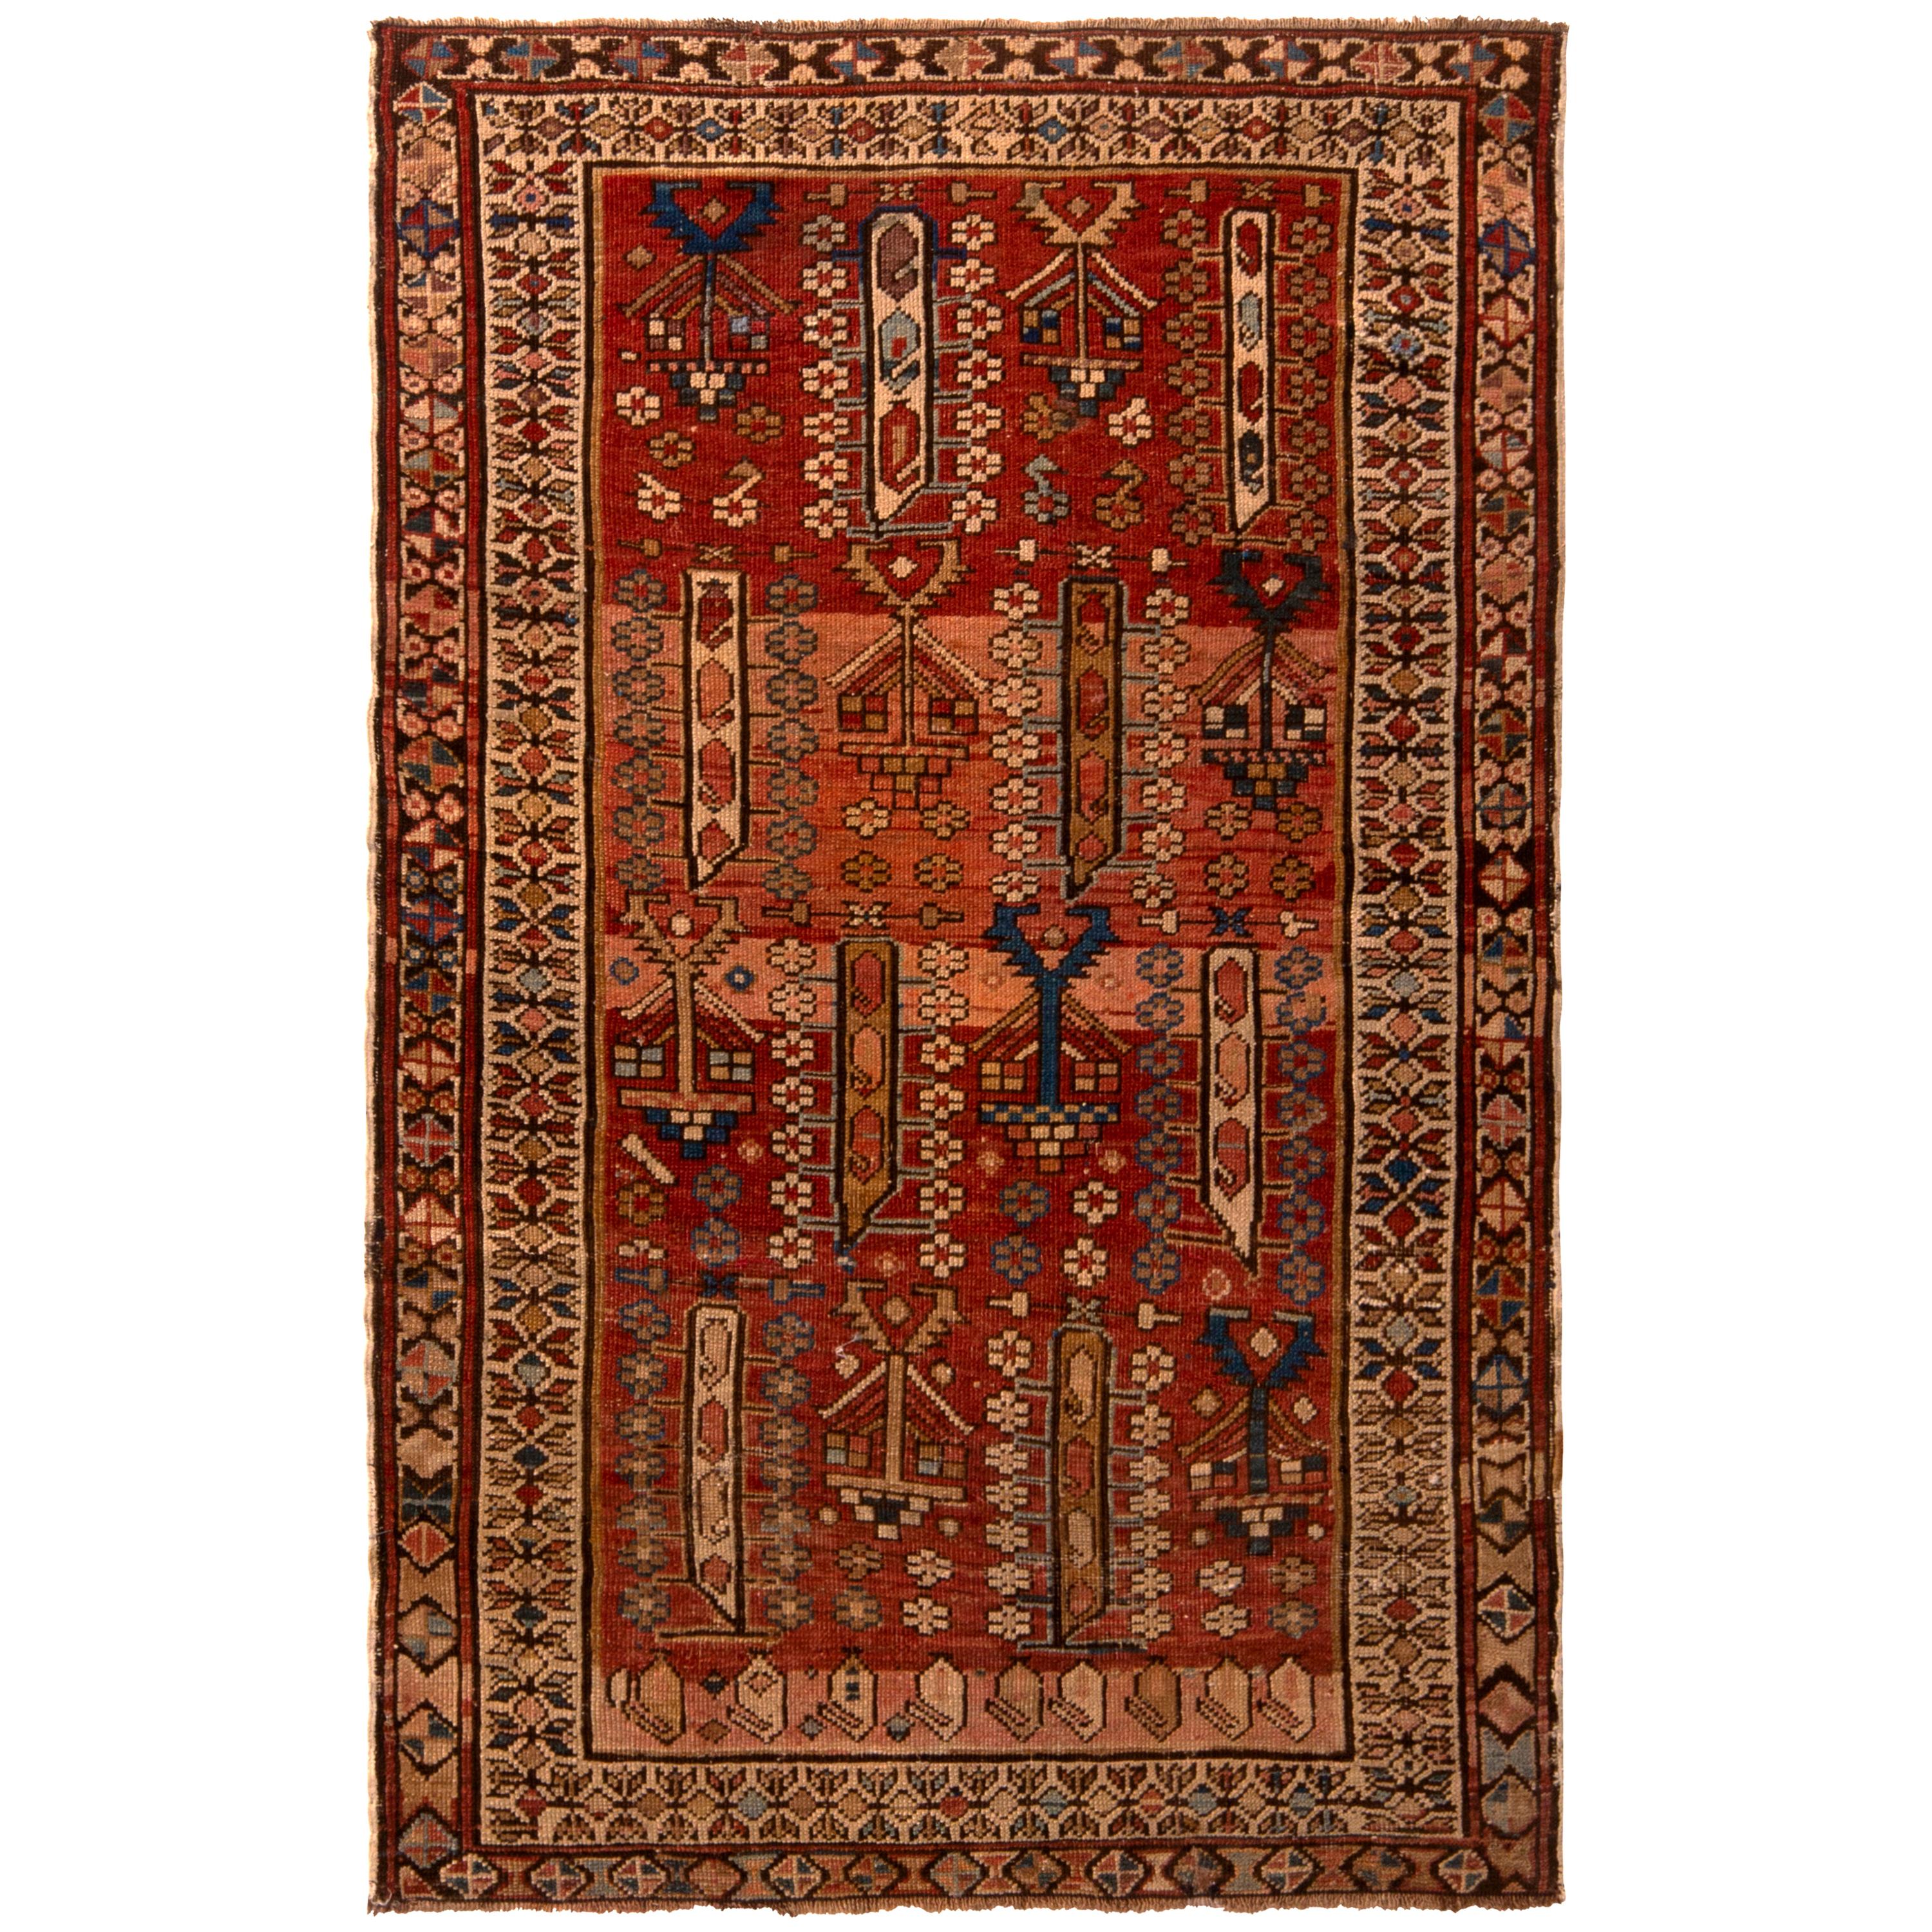 Antique Kuba Rug Beige Red Boteh Tribal Patterns with Pink Accent by Rug & Kilim For Sale